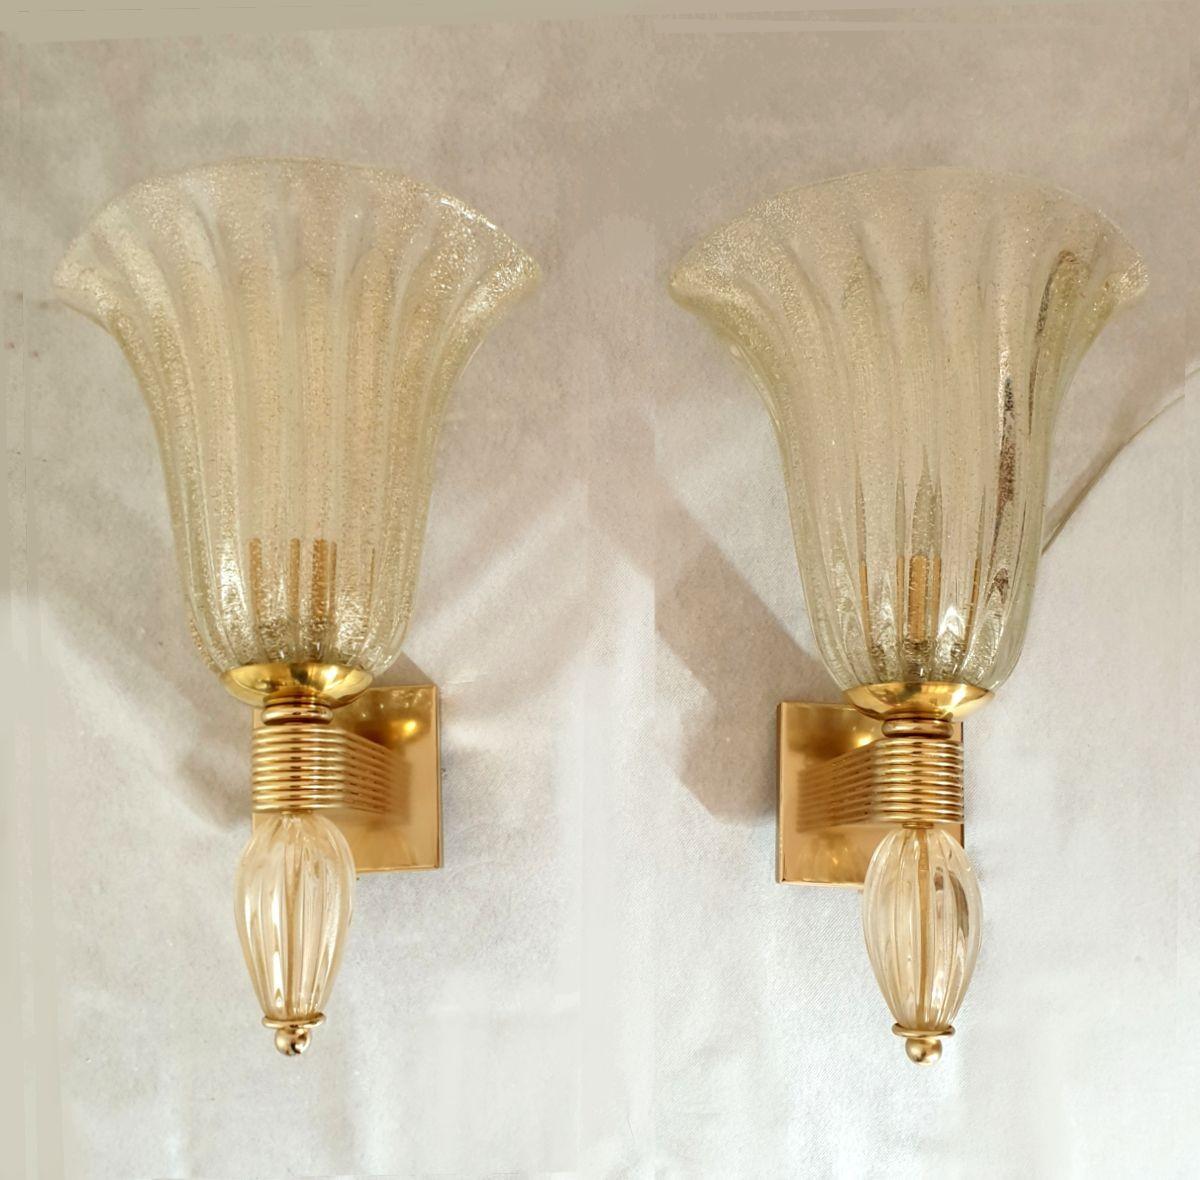 Pair of large Neoclassical style Murano glass sconces, attributed to Barovier & Toso, Italy 1970s.
The Mid-Century sconces are made of hand blown clear and thick Murano glass, with real gold flakes.
The gold flakes inside the Murano glass create a